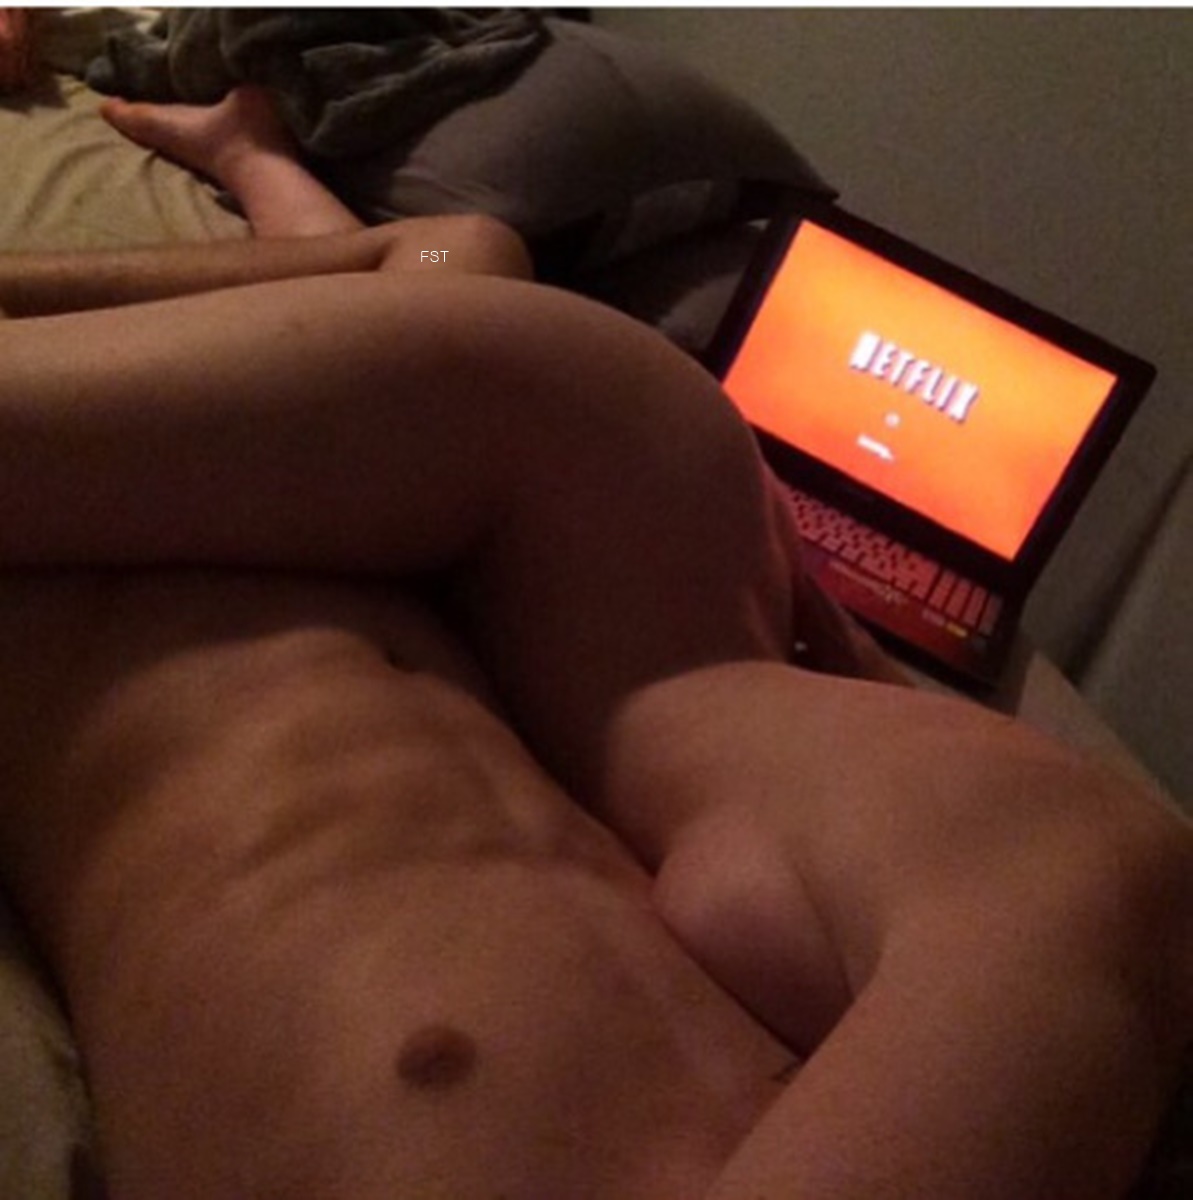 Netflix, the online TV and movie streaming service is used as a gateway for many young men and women to no-strings-attached sex.